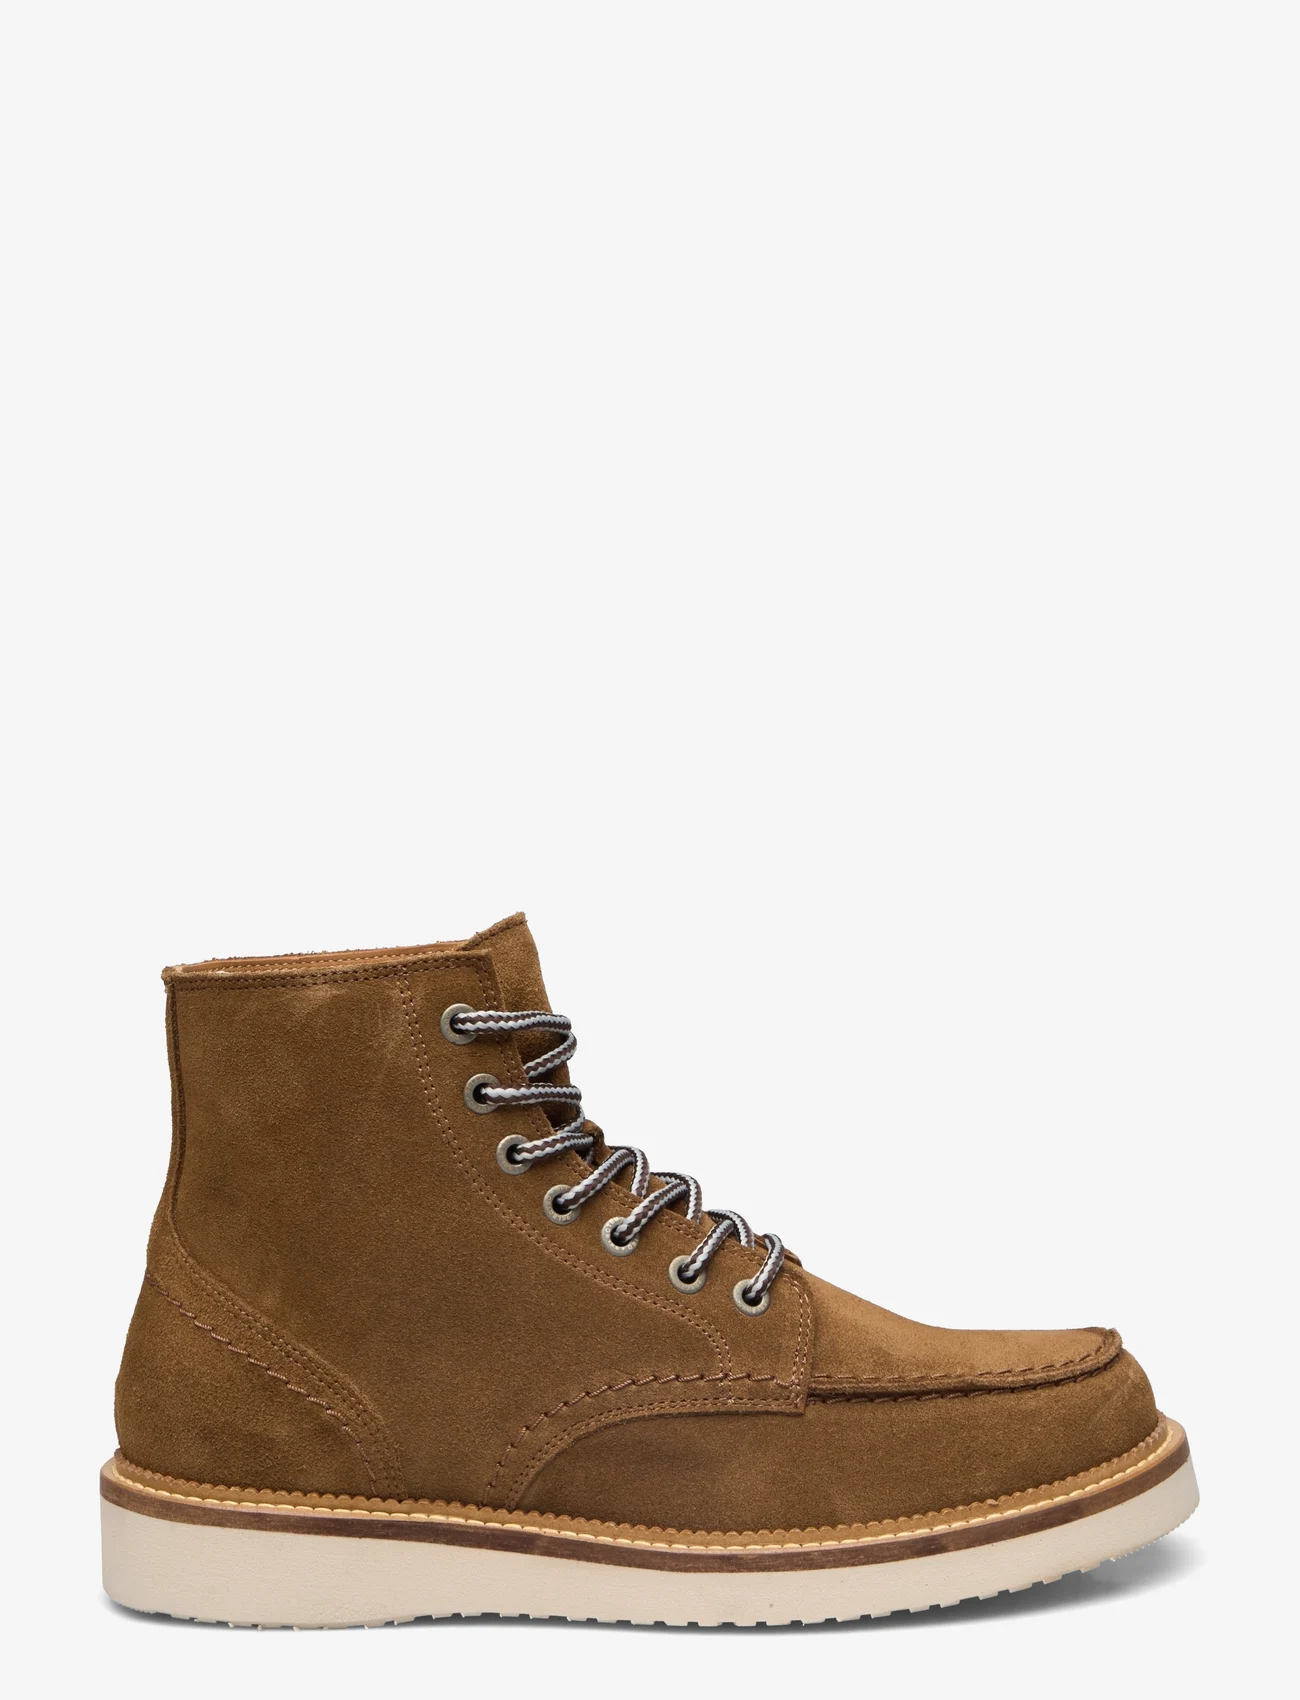 Selected Homme - SLHTEO NEW SUEDE MOC-TOE BOOT B - suvarstomieji batai - tobacco brown - 1